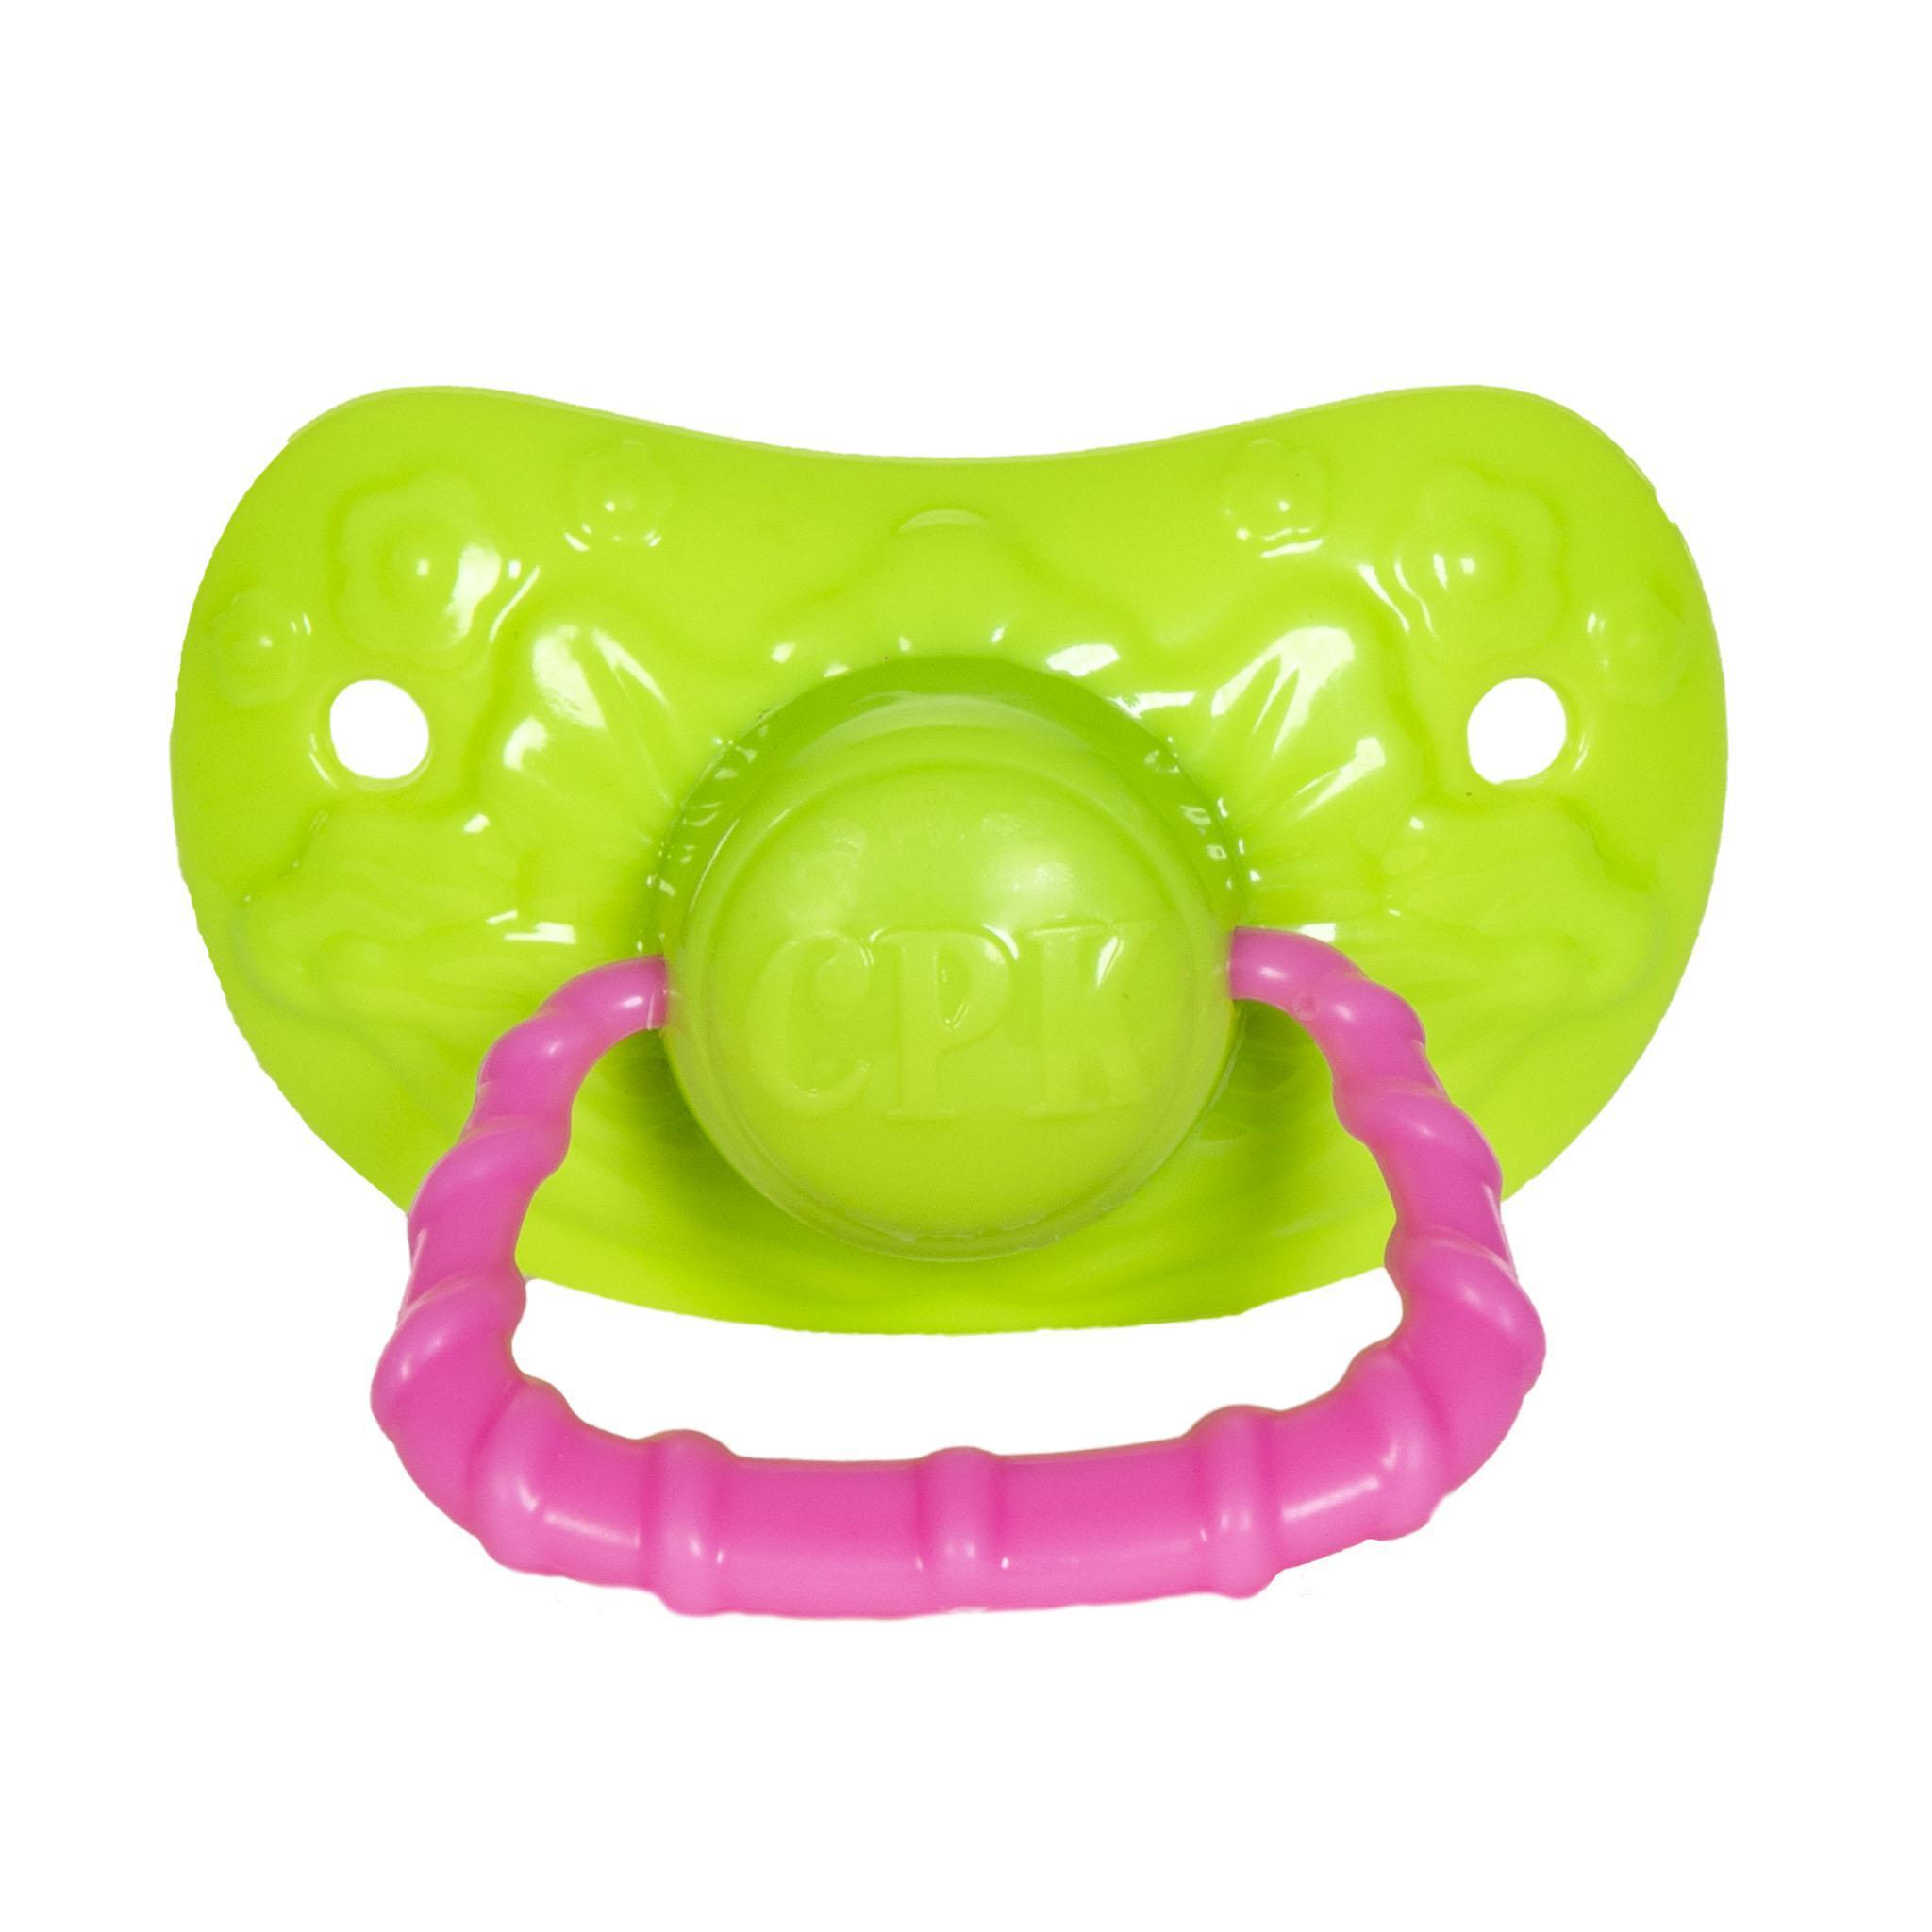 CPK Toy Pacifier Cabbage Shaped